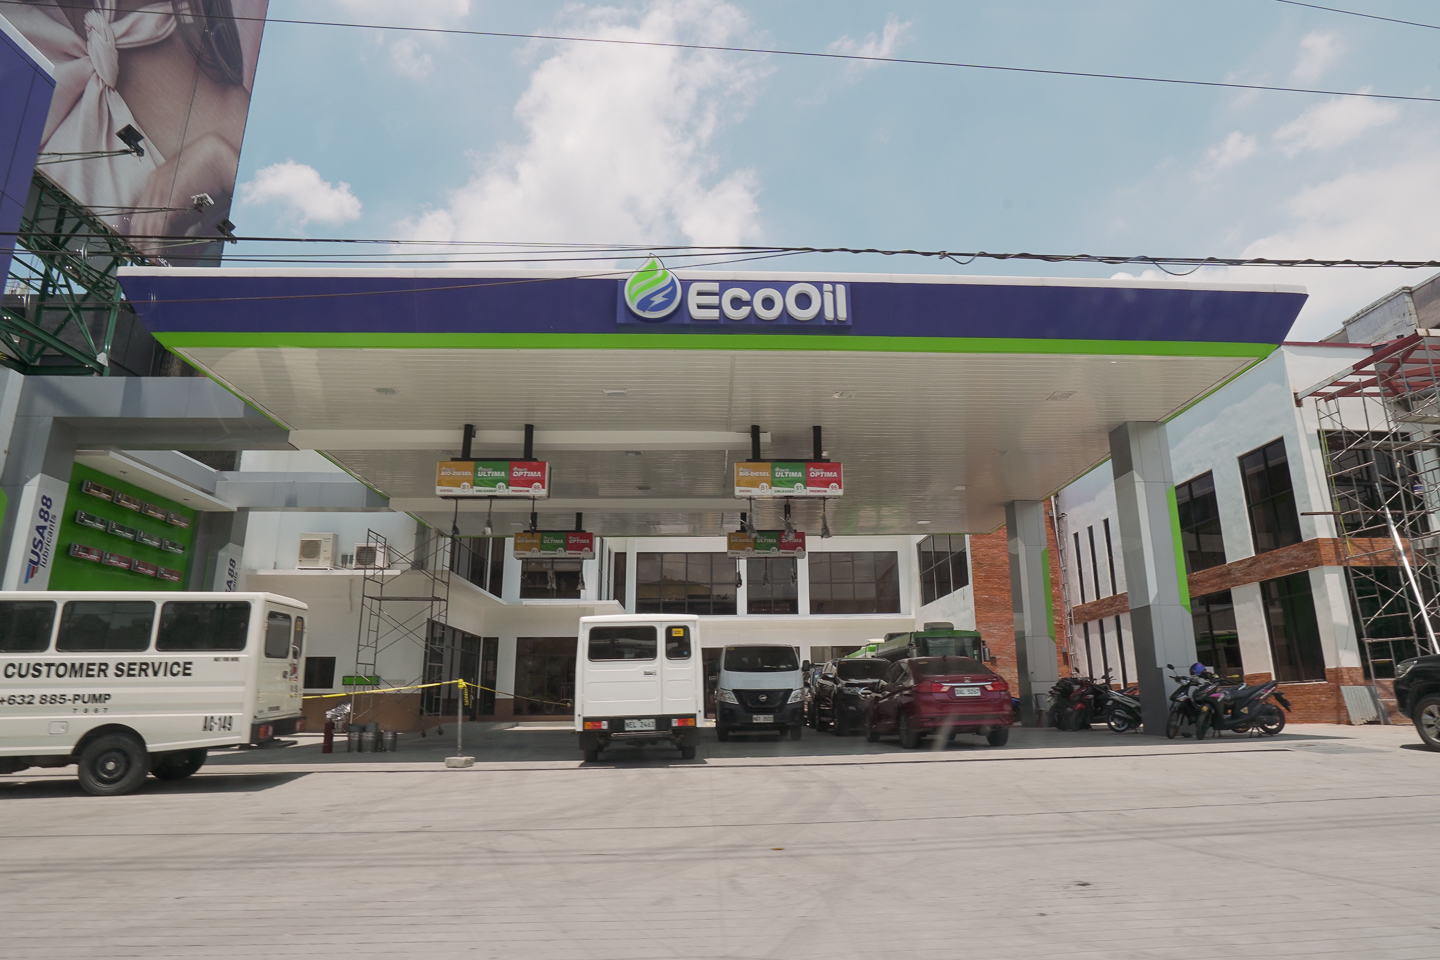 Fuel Price rollback September 20, 2022: Diesel to go down PHP 4.15/L, no movement for gasoline